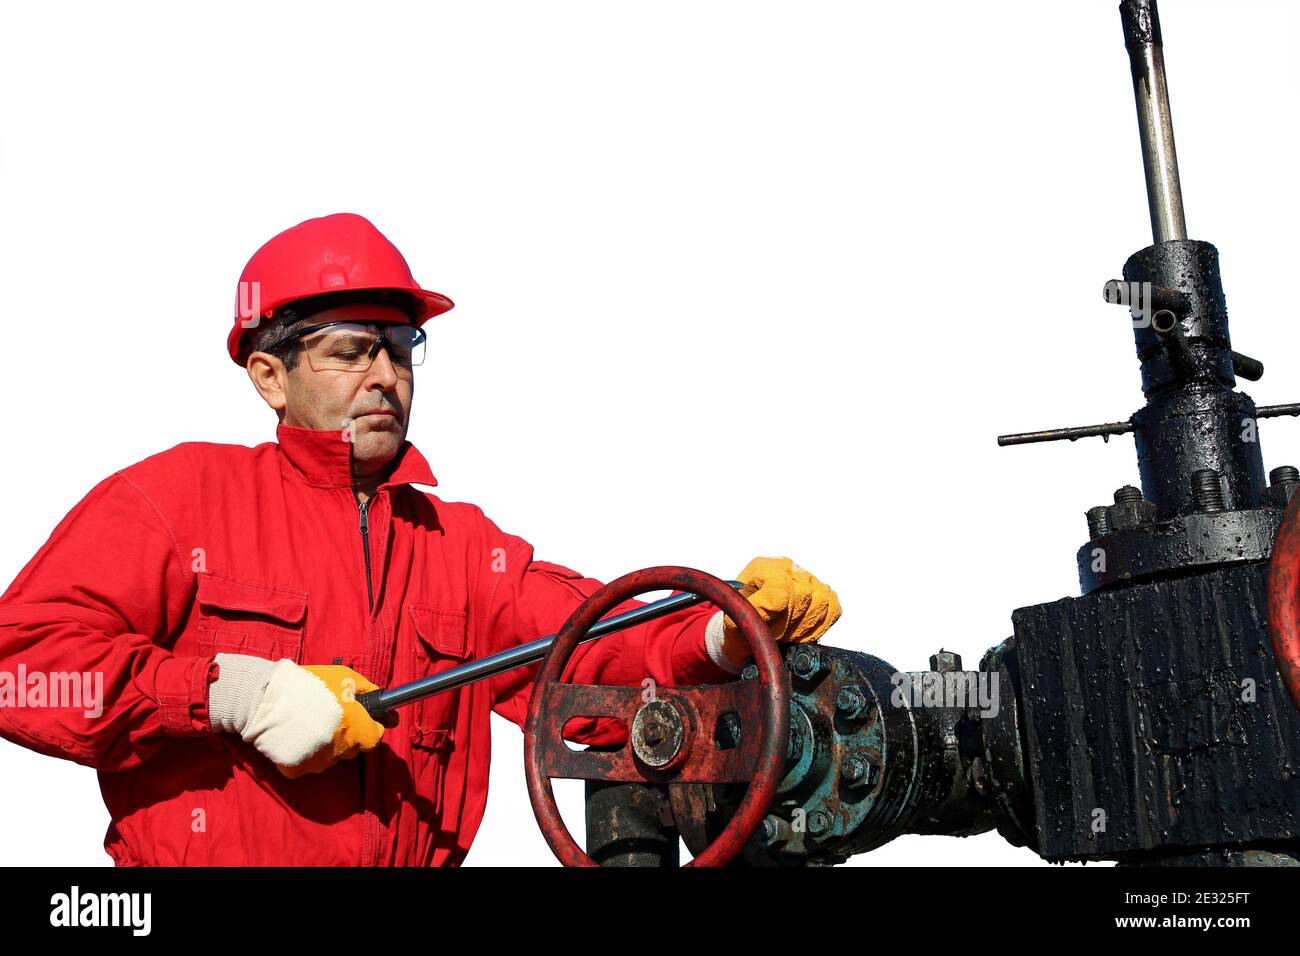 Petroleum Worker in Red Coveralls and Protective Clothing Servicing Oil Equipment. Oil Rig Equipment Maintenance. Stock Photo